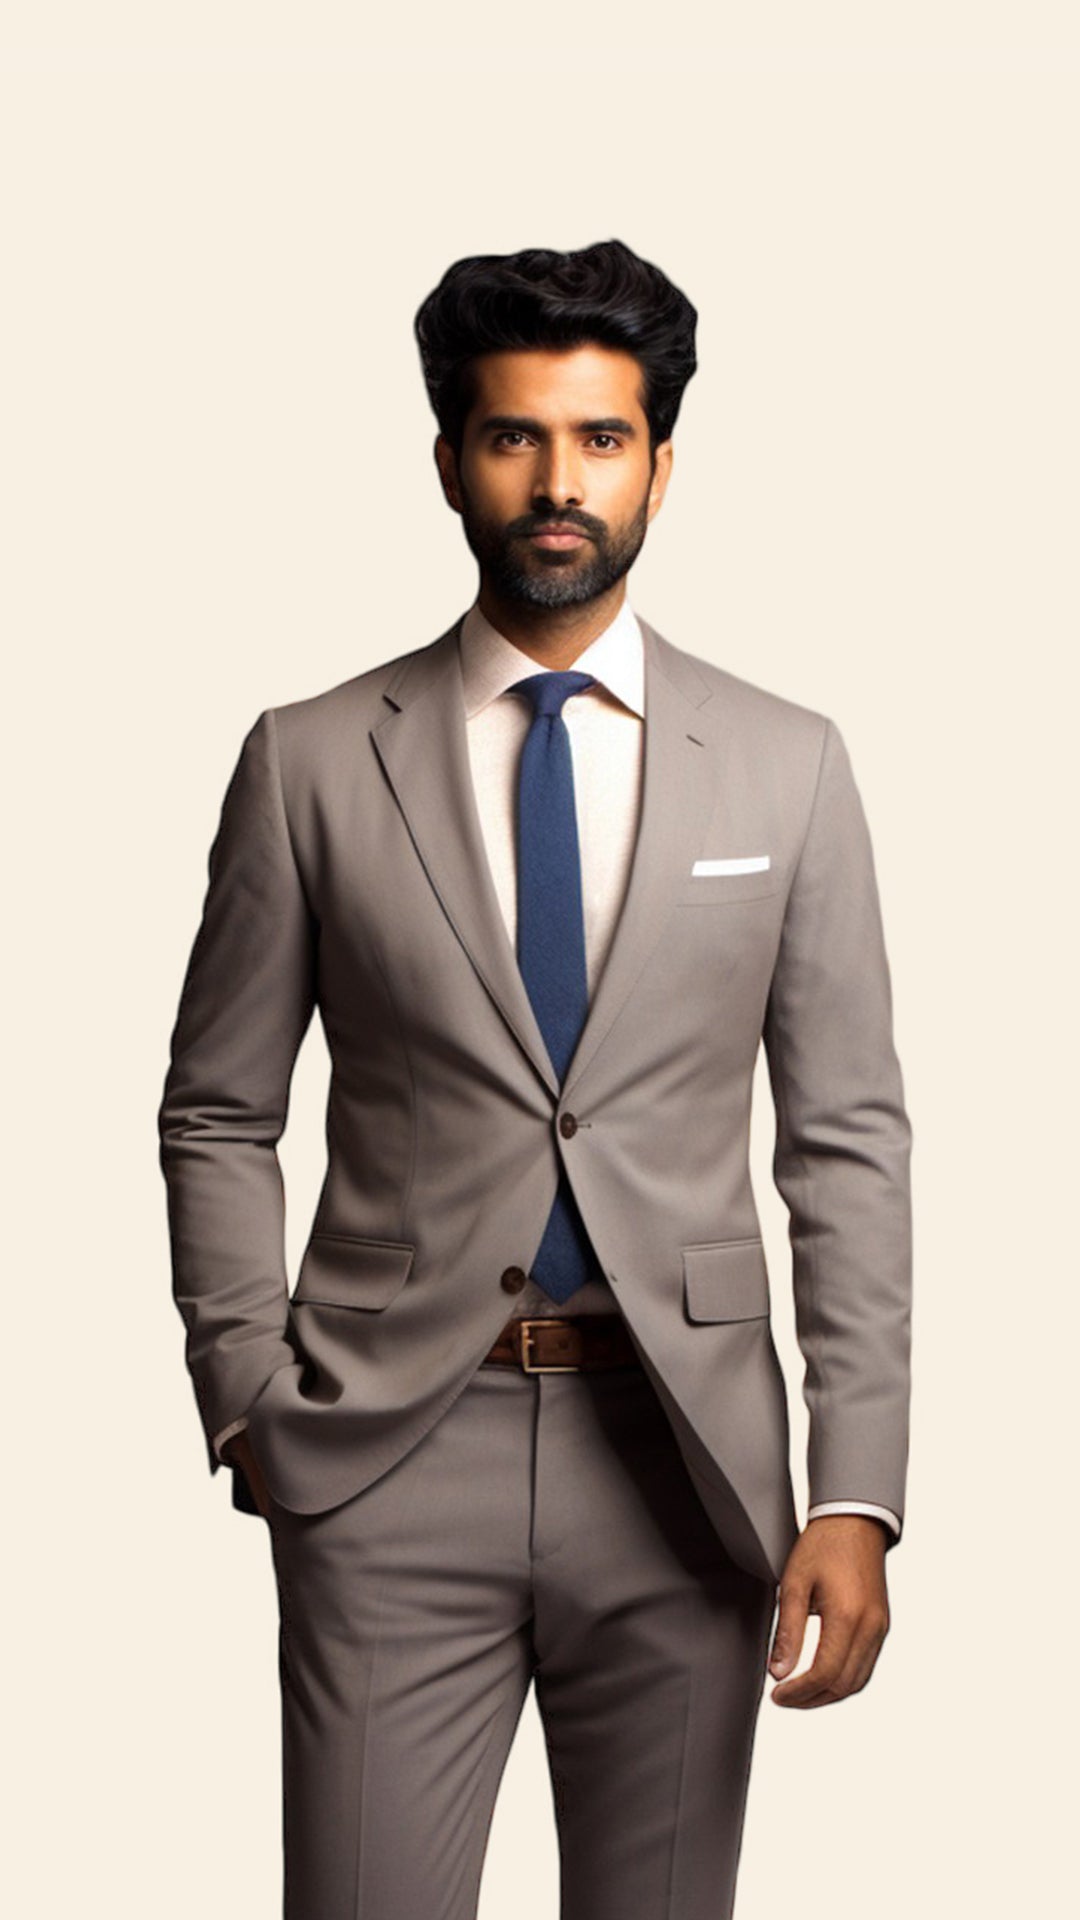 Bespoke Men's Beige Suit in Hazel Wood Shade - Crafted in Terry Rayon by BWO